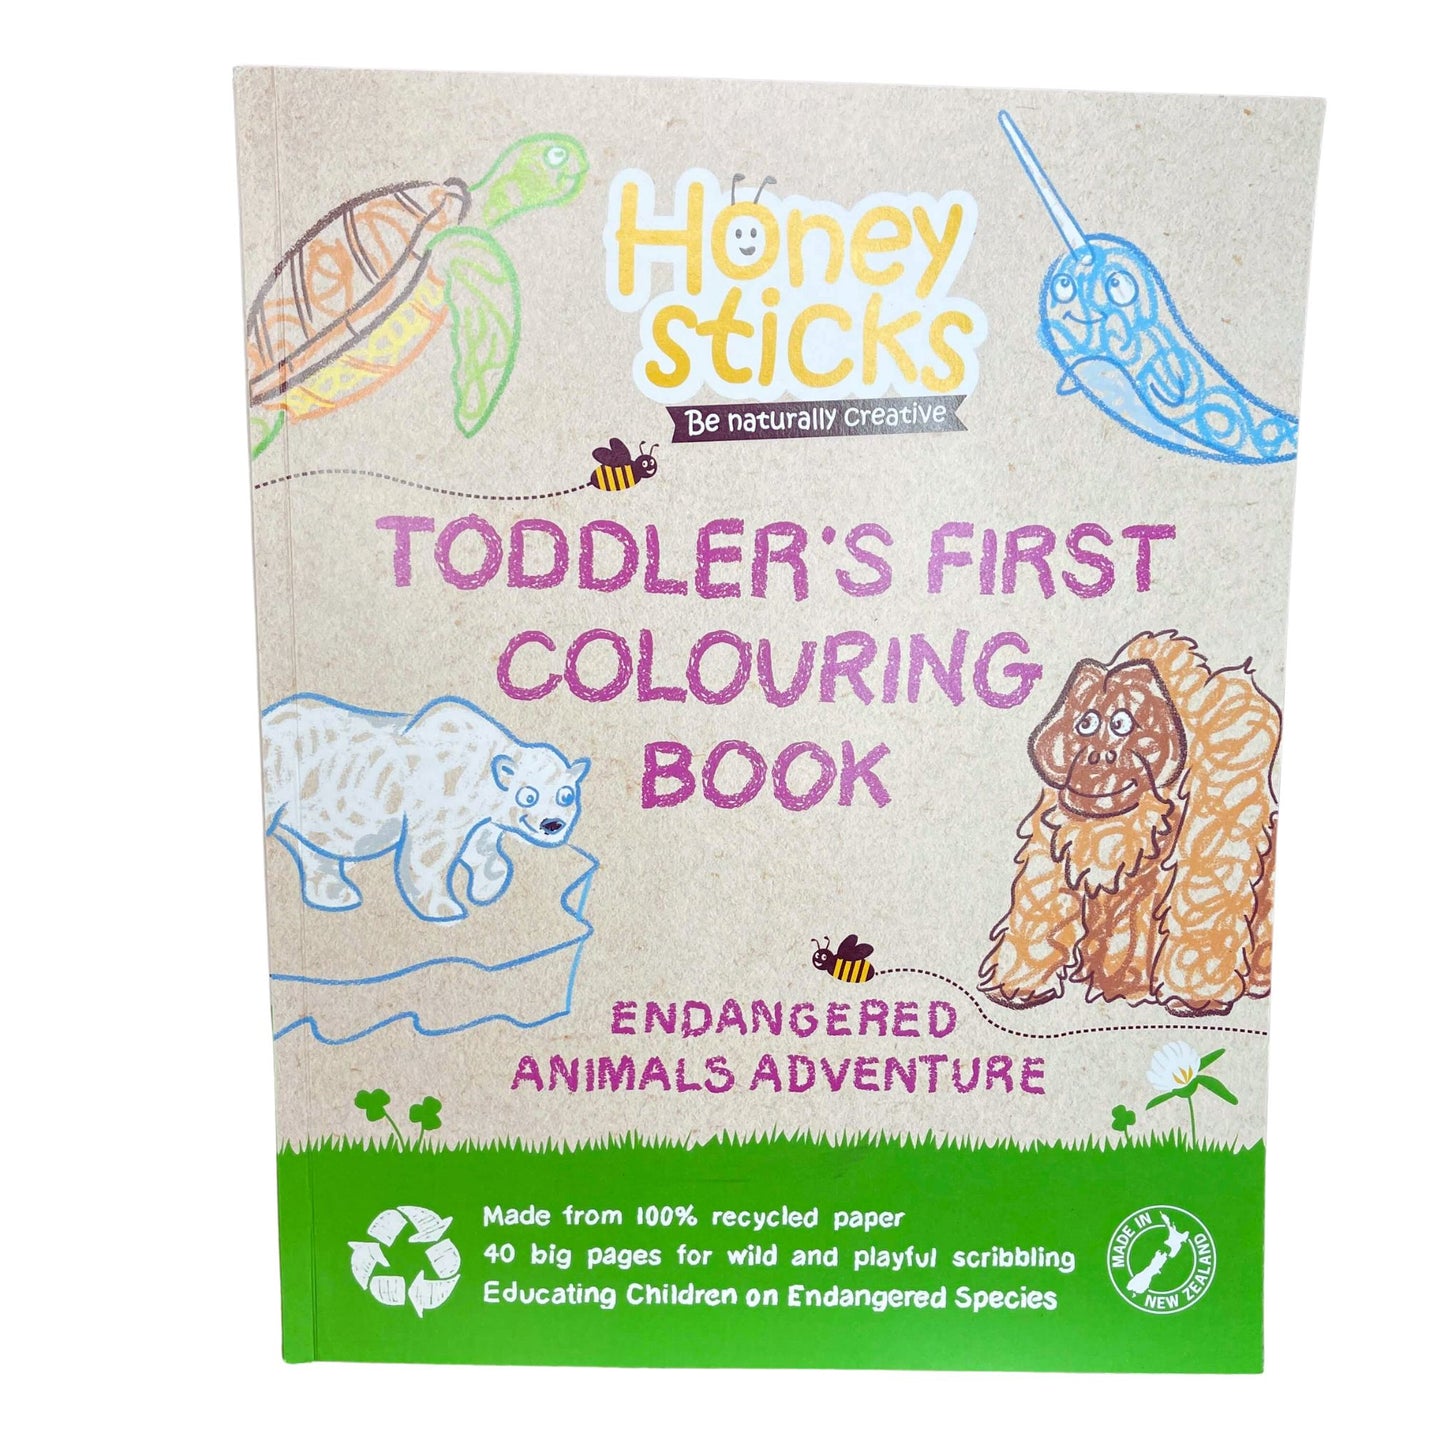 Toddlers First Colouring Book - Endangered Animals Adventure